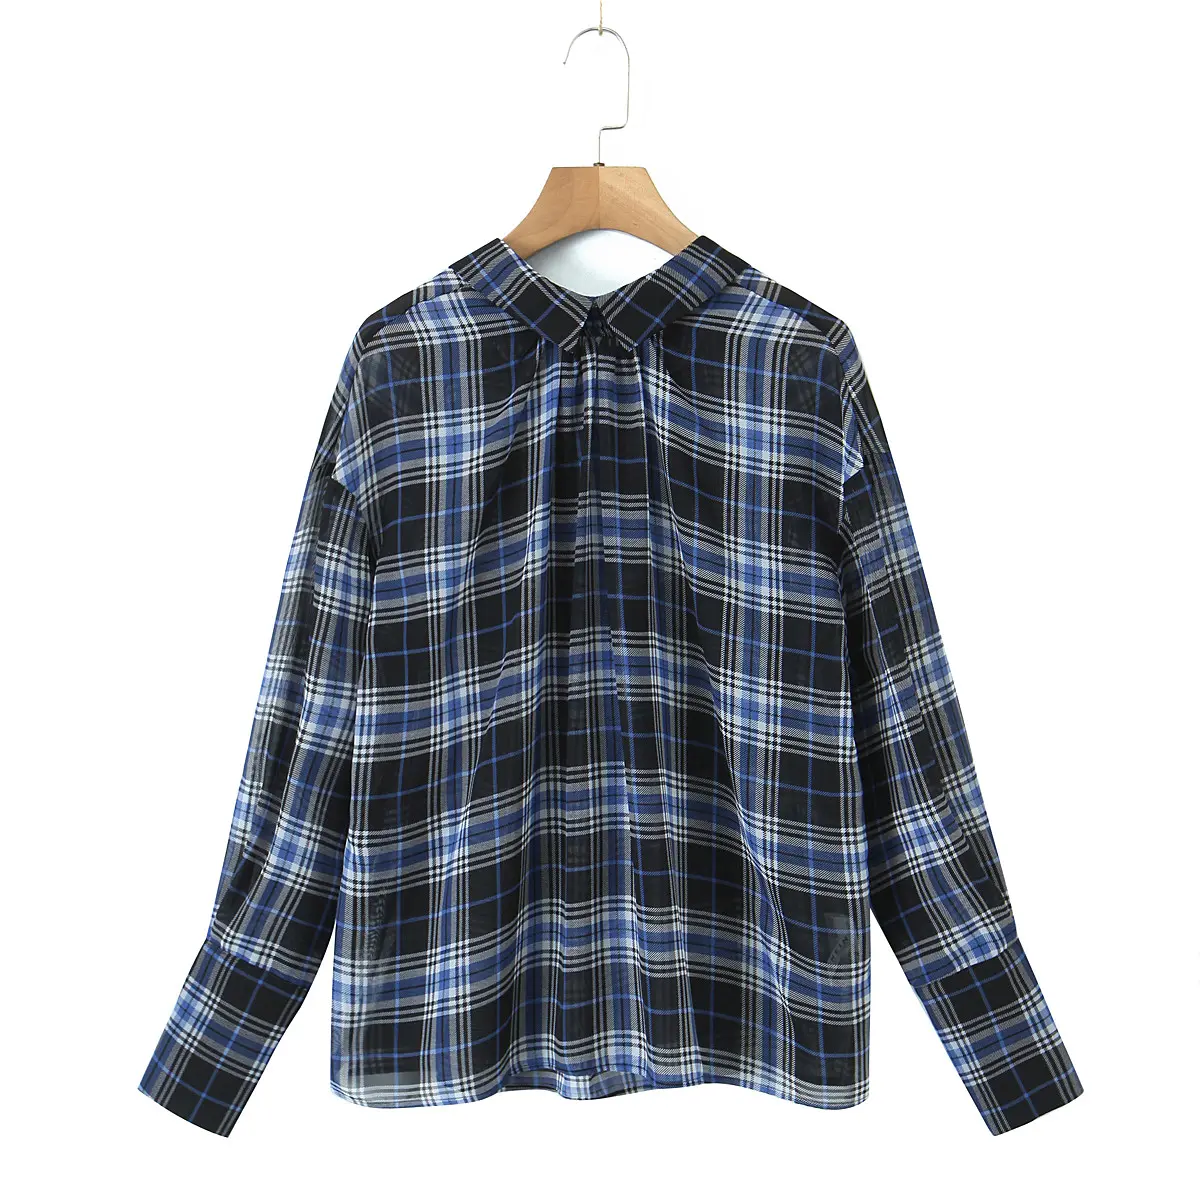 Peter pan collar black and blue color long sleeve casual women modest plaid chiffon blouse